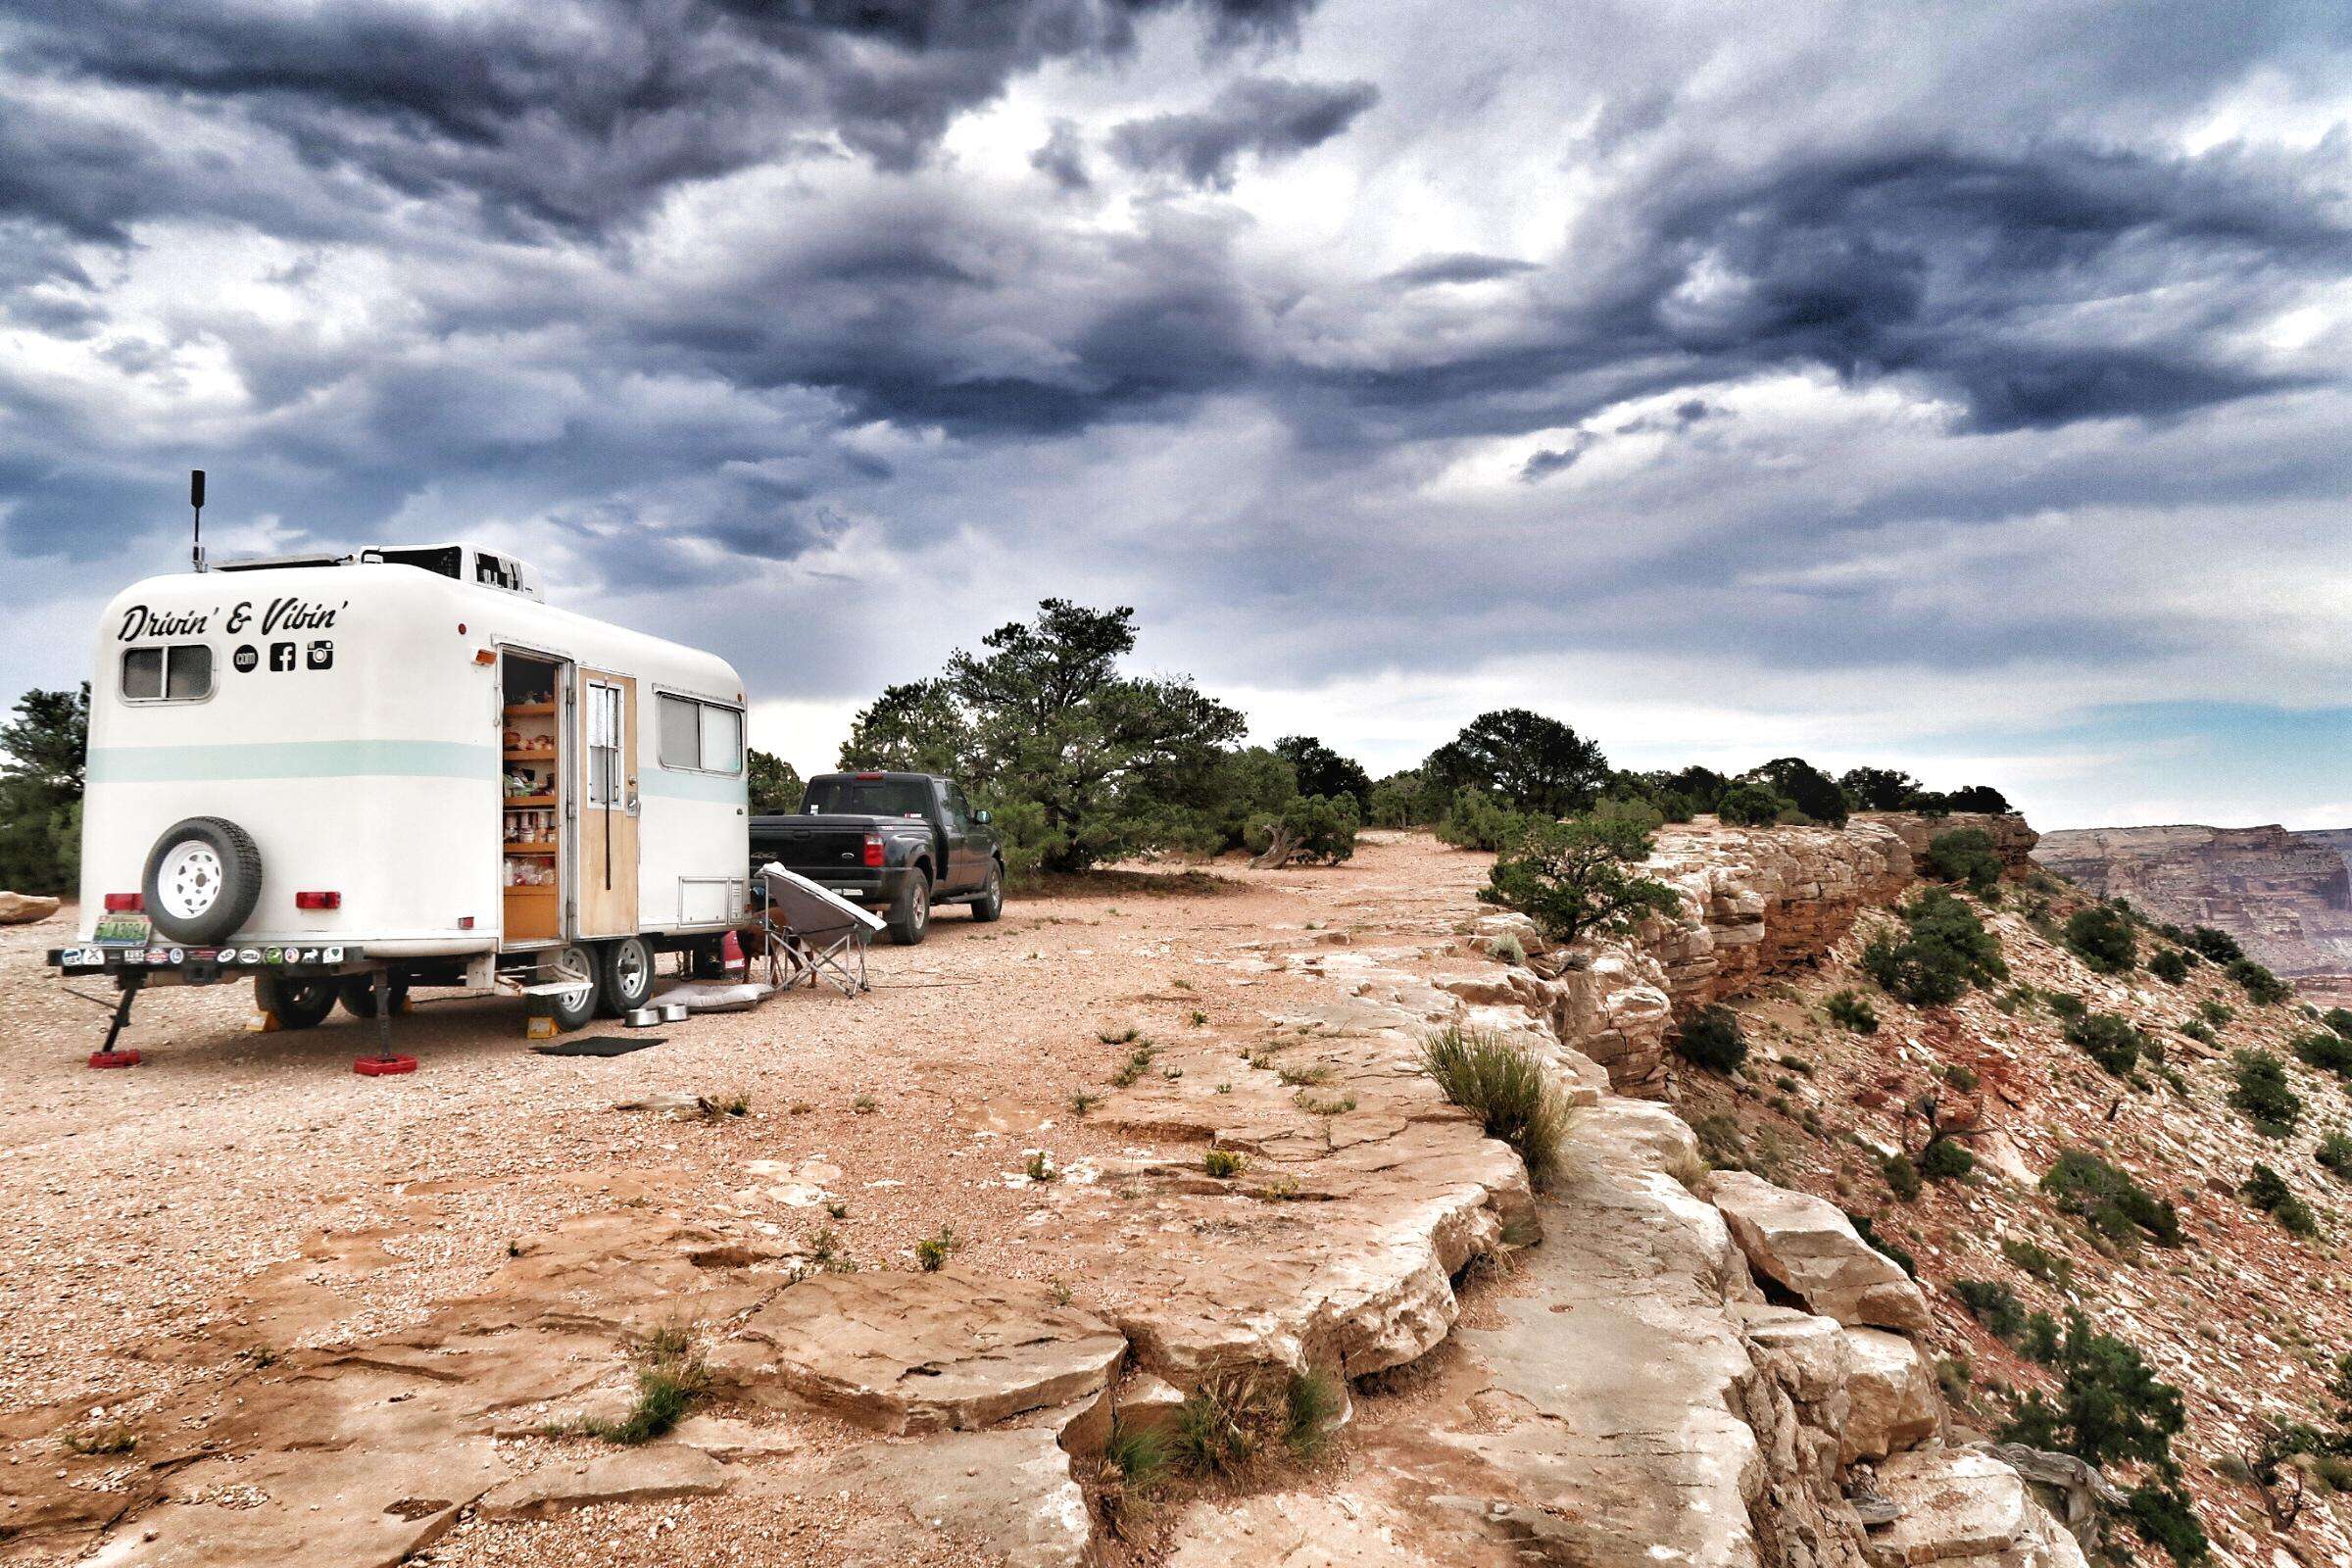 FREE CAMPING on the edge of the Little Grand Canyon in ...